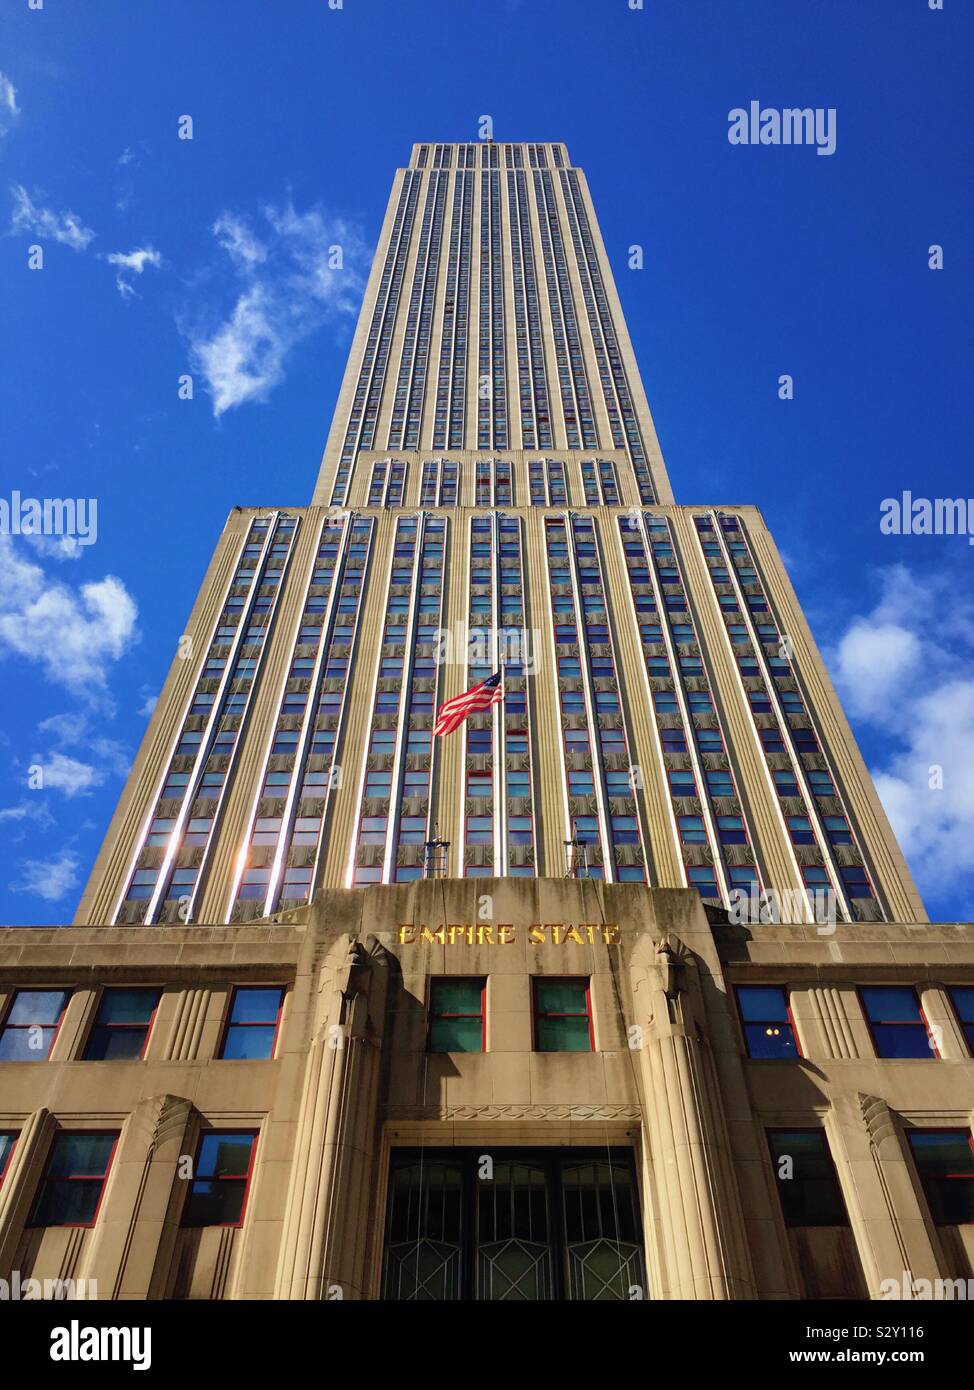 the-front-entrance-of-the-empire-state-building-skyscraper-is-on-fifth-avenue-in-midtown-manhattan-nyc-usa-S2Y116.jpg